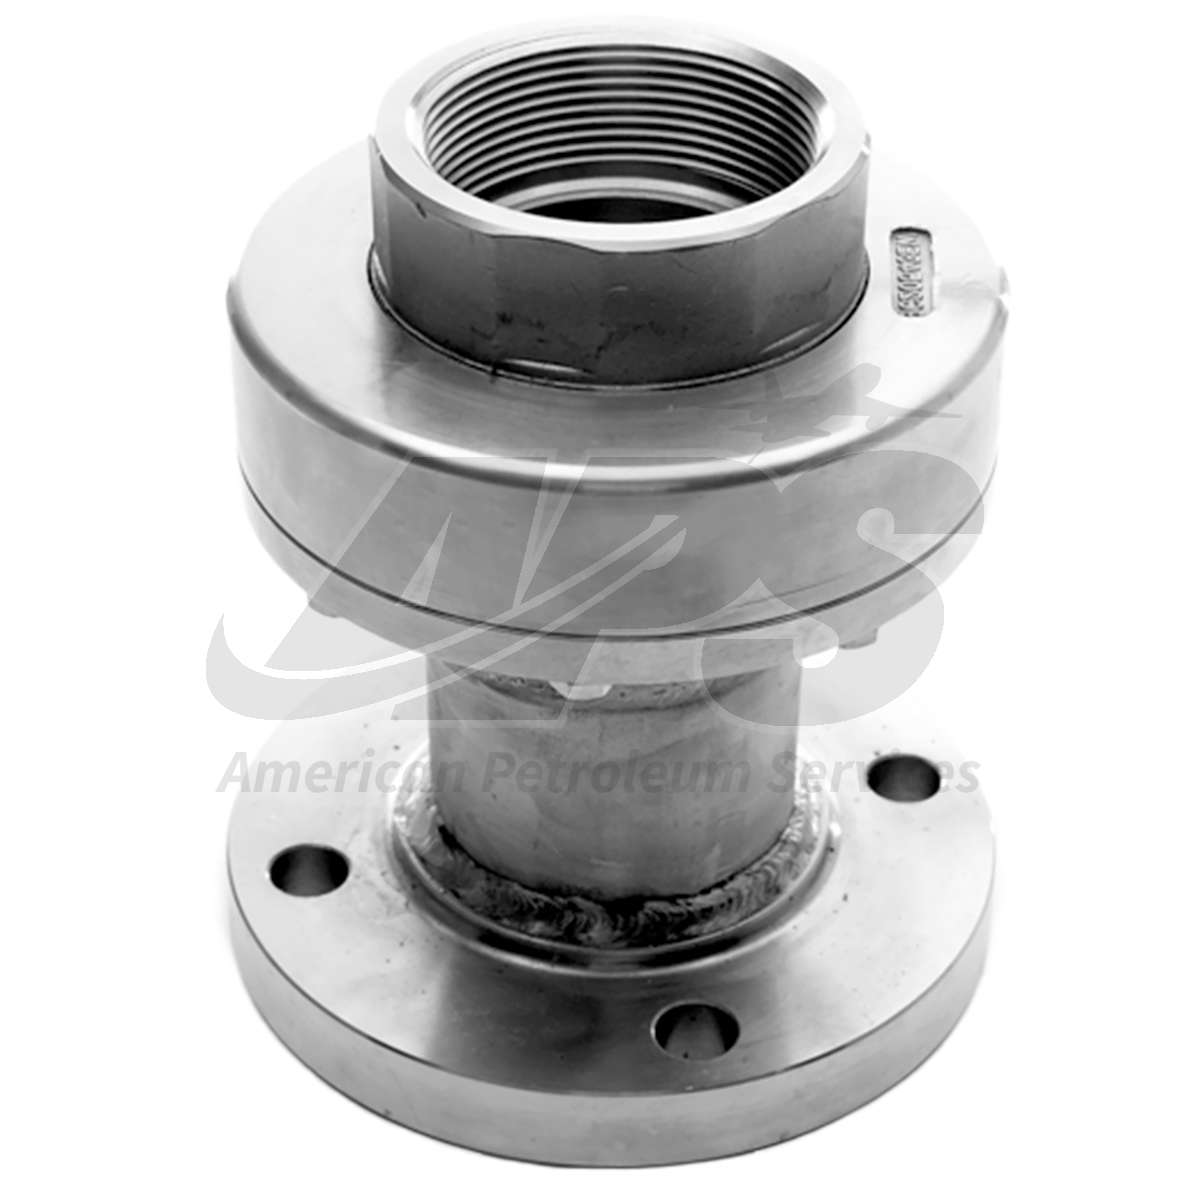 7920FO-0302-G048 SWIVEL JOINT (3, HOSE REEL, STAINLESS STEEL,  FLUOROCARBON, 8.66 OVERALL LENGTH)